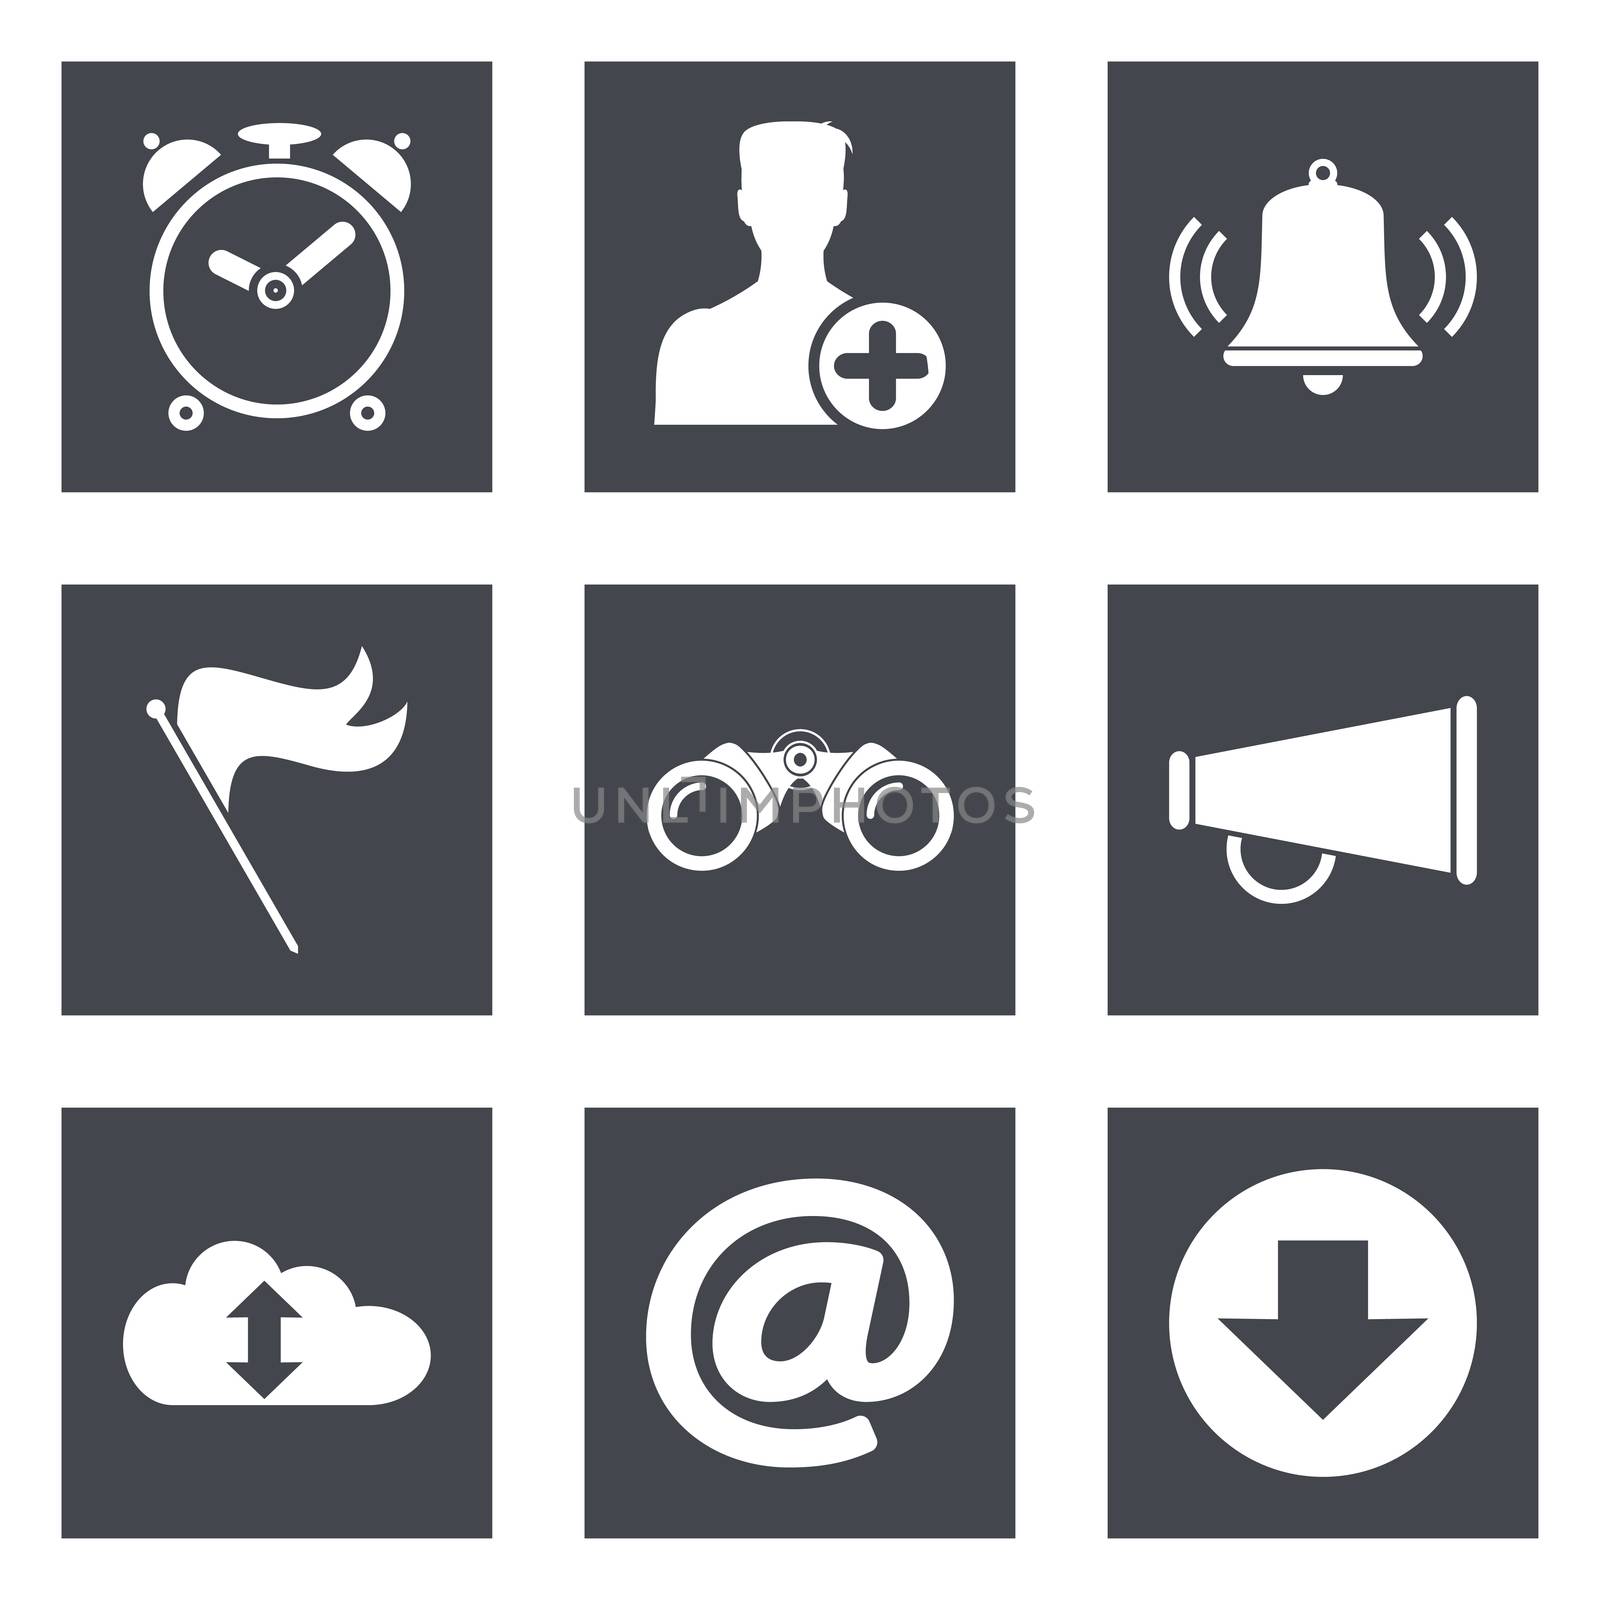 Icons for Web Design and Mobile Applications by smoki